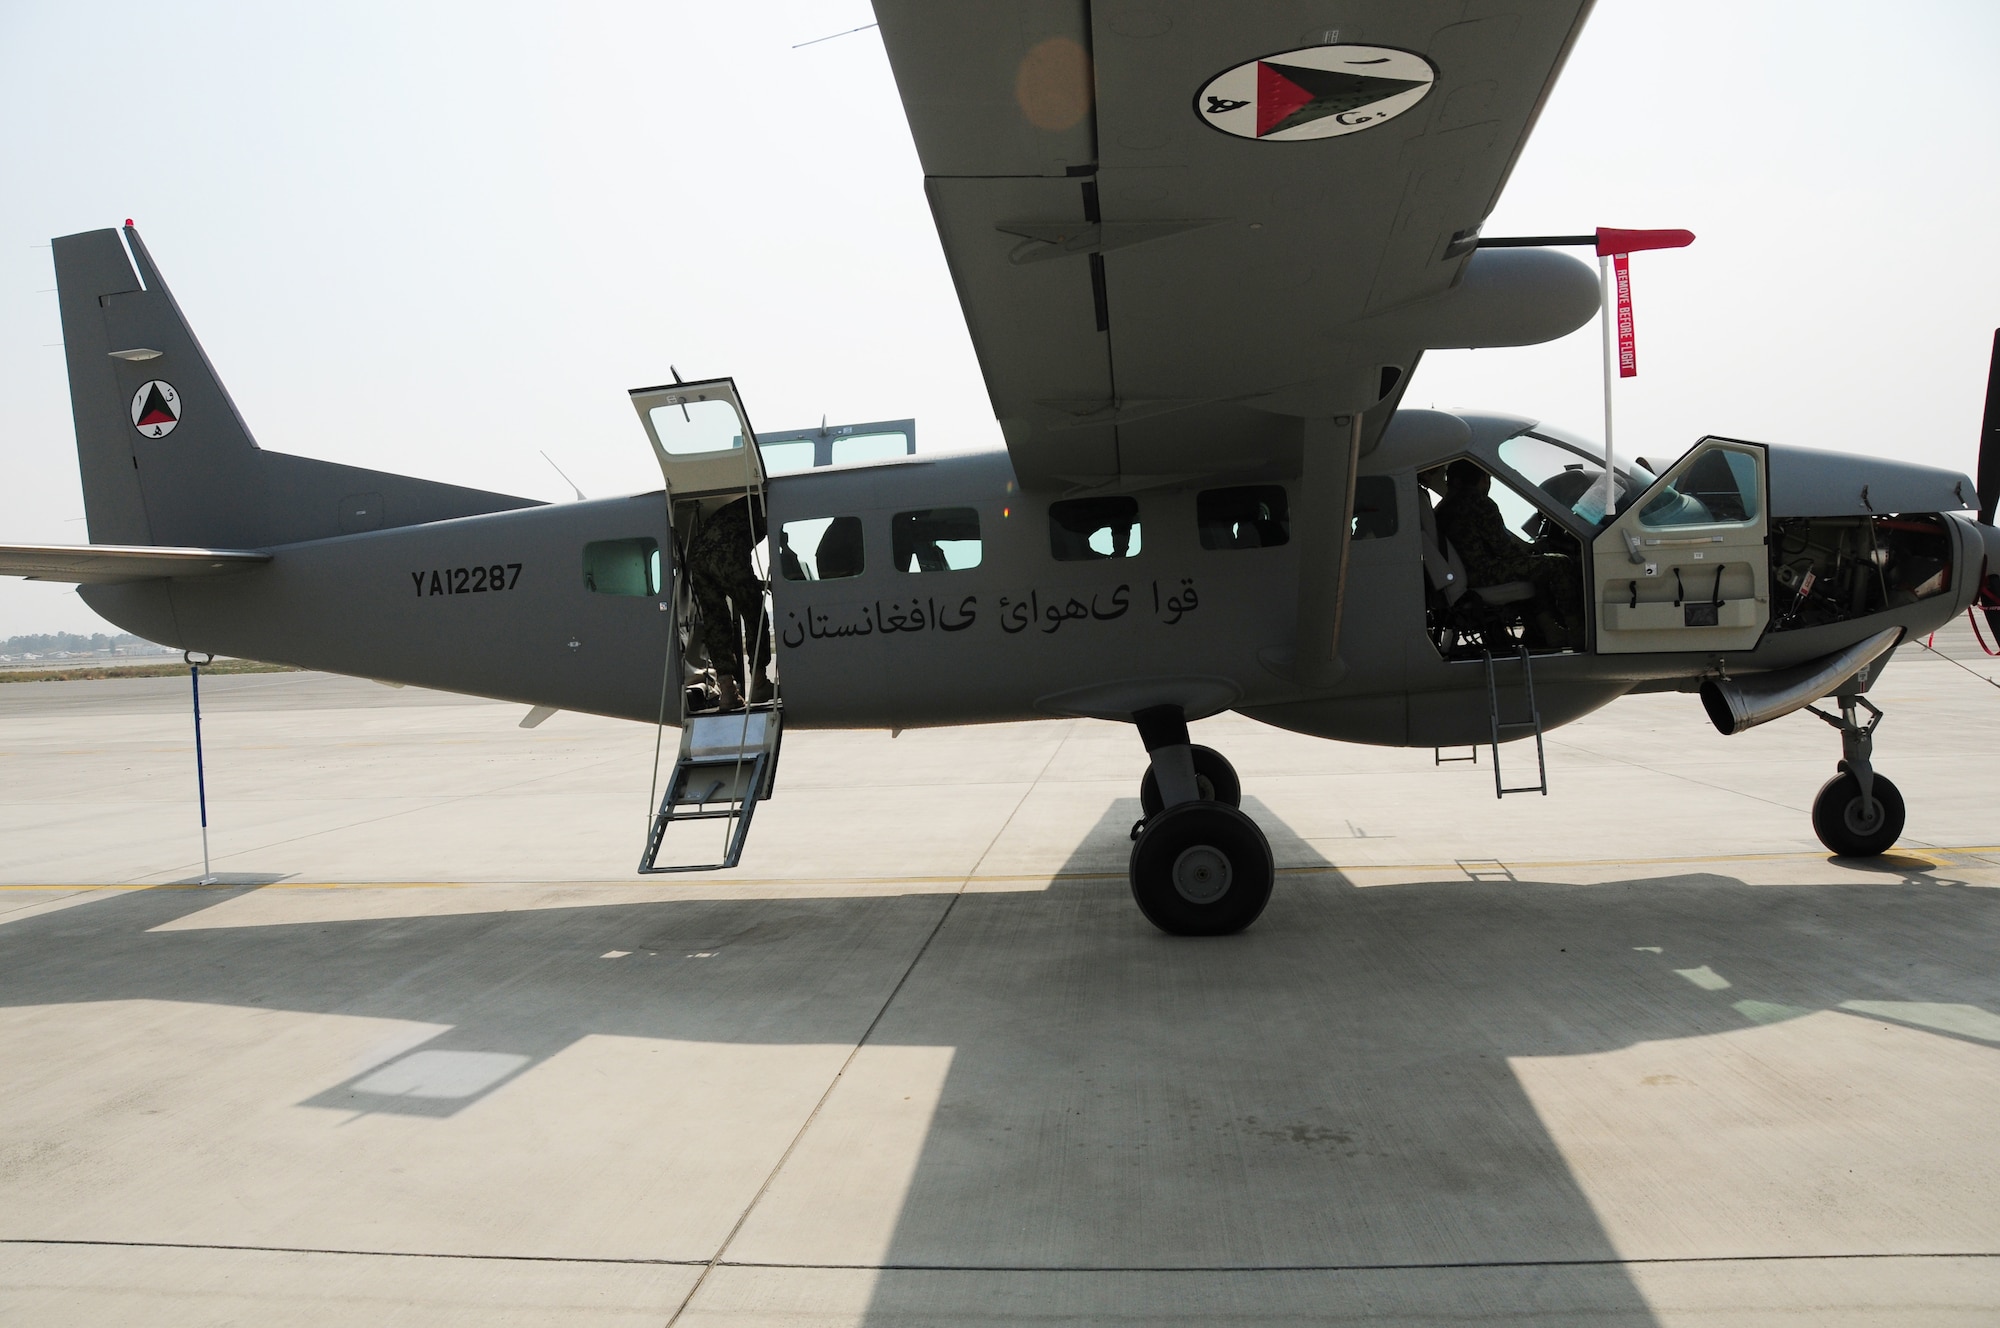 A new Afghan Air Force C-208B sits on the flight line at Kabul International Airport, Kabul, Afghanistan November 1, 2011.  The Cessna was on a “road show” tour around Afghanistan.  (U.S. Air Force photo by Senior Airman Amber Williams)